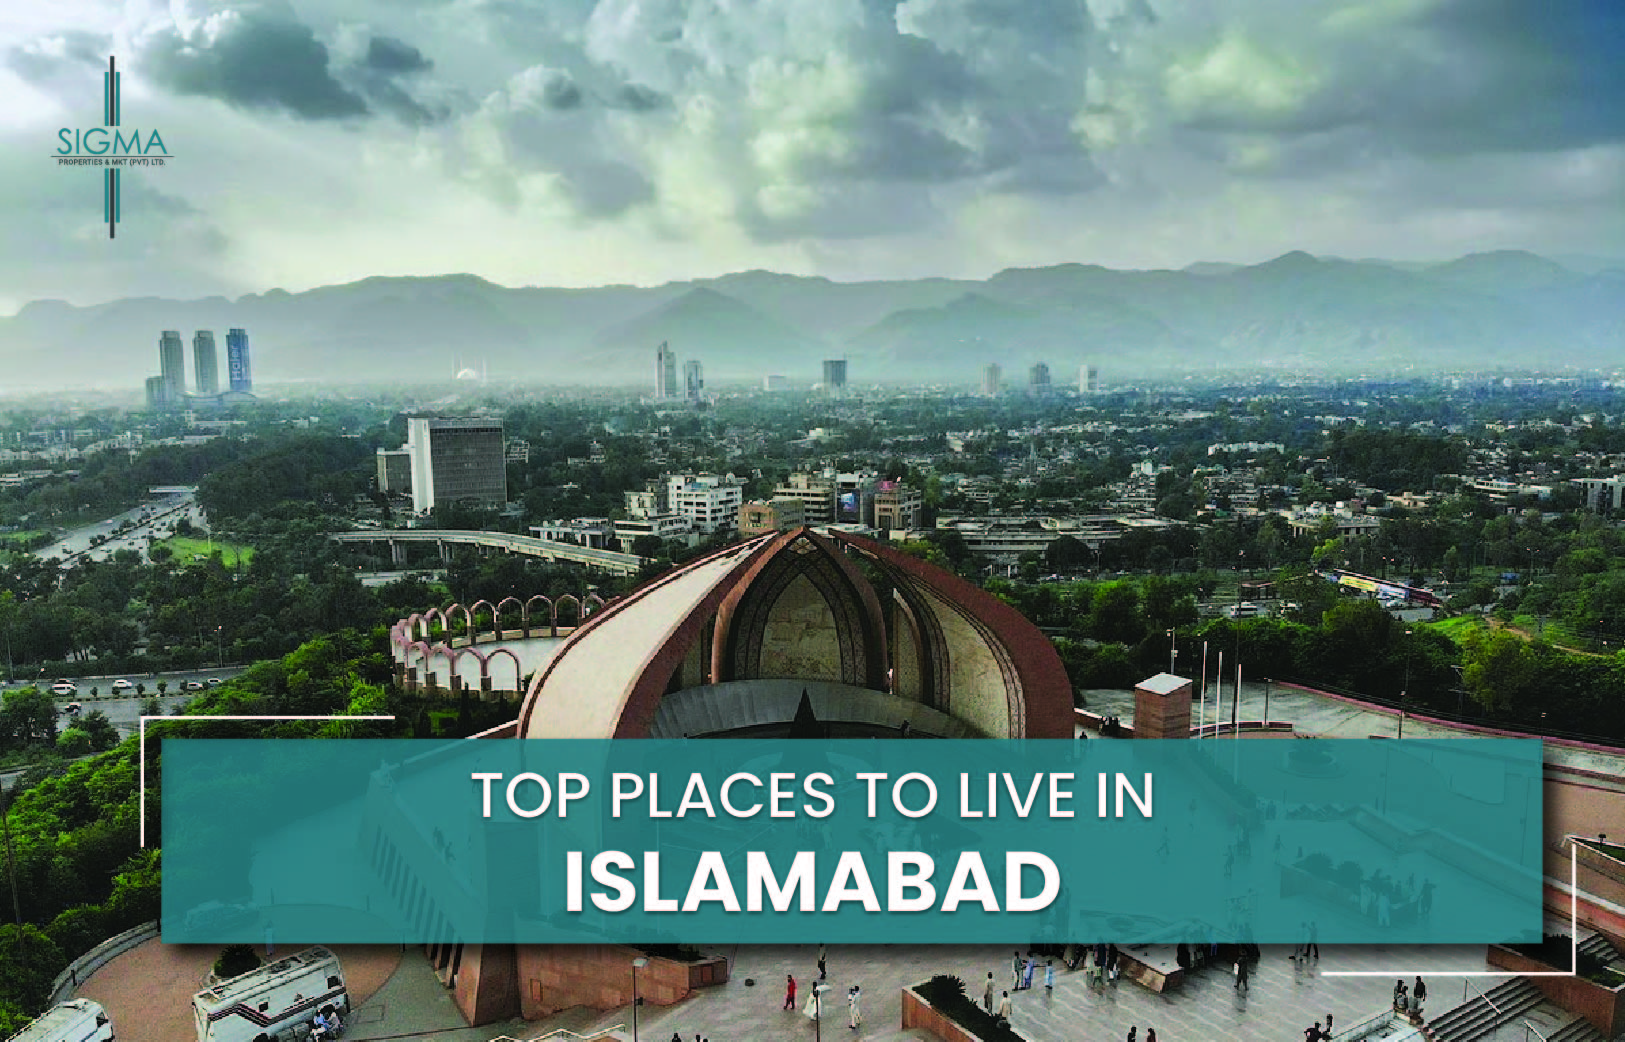 Top places in islamabad